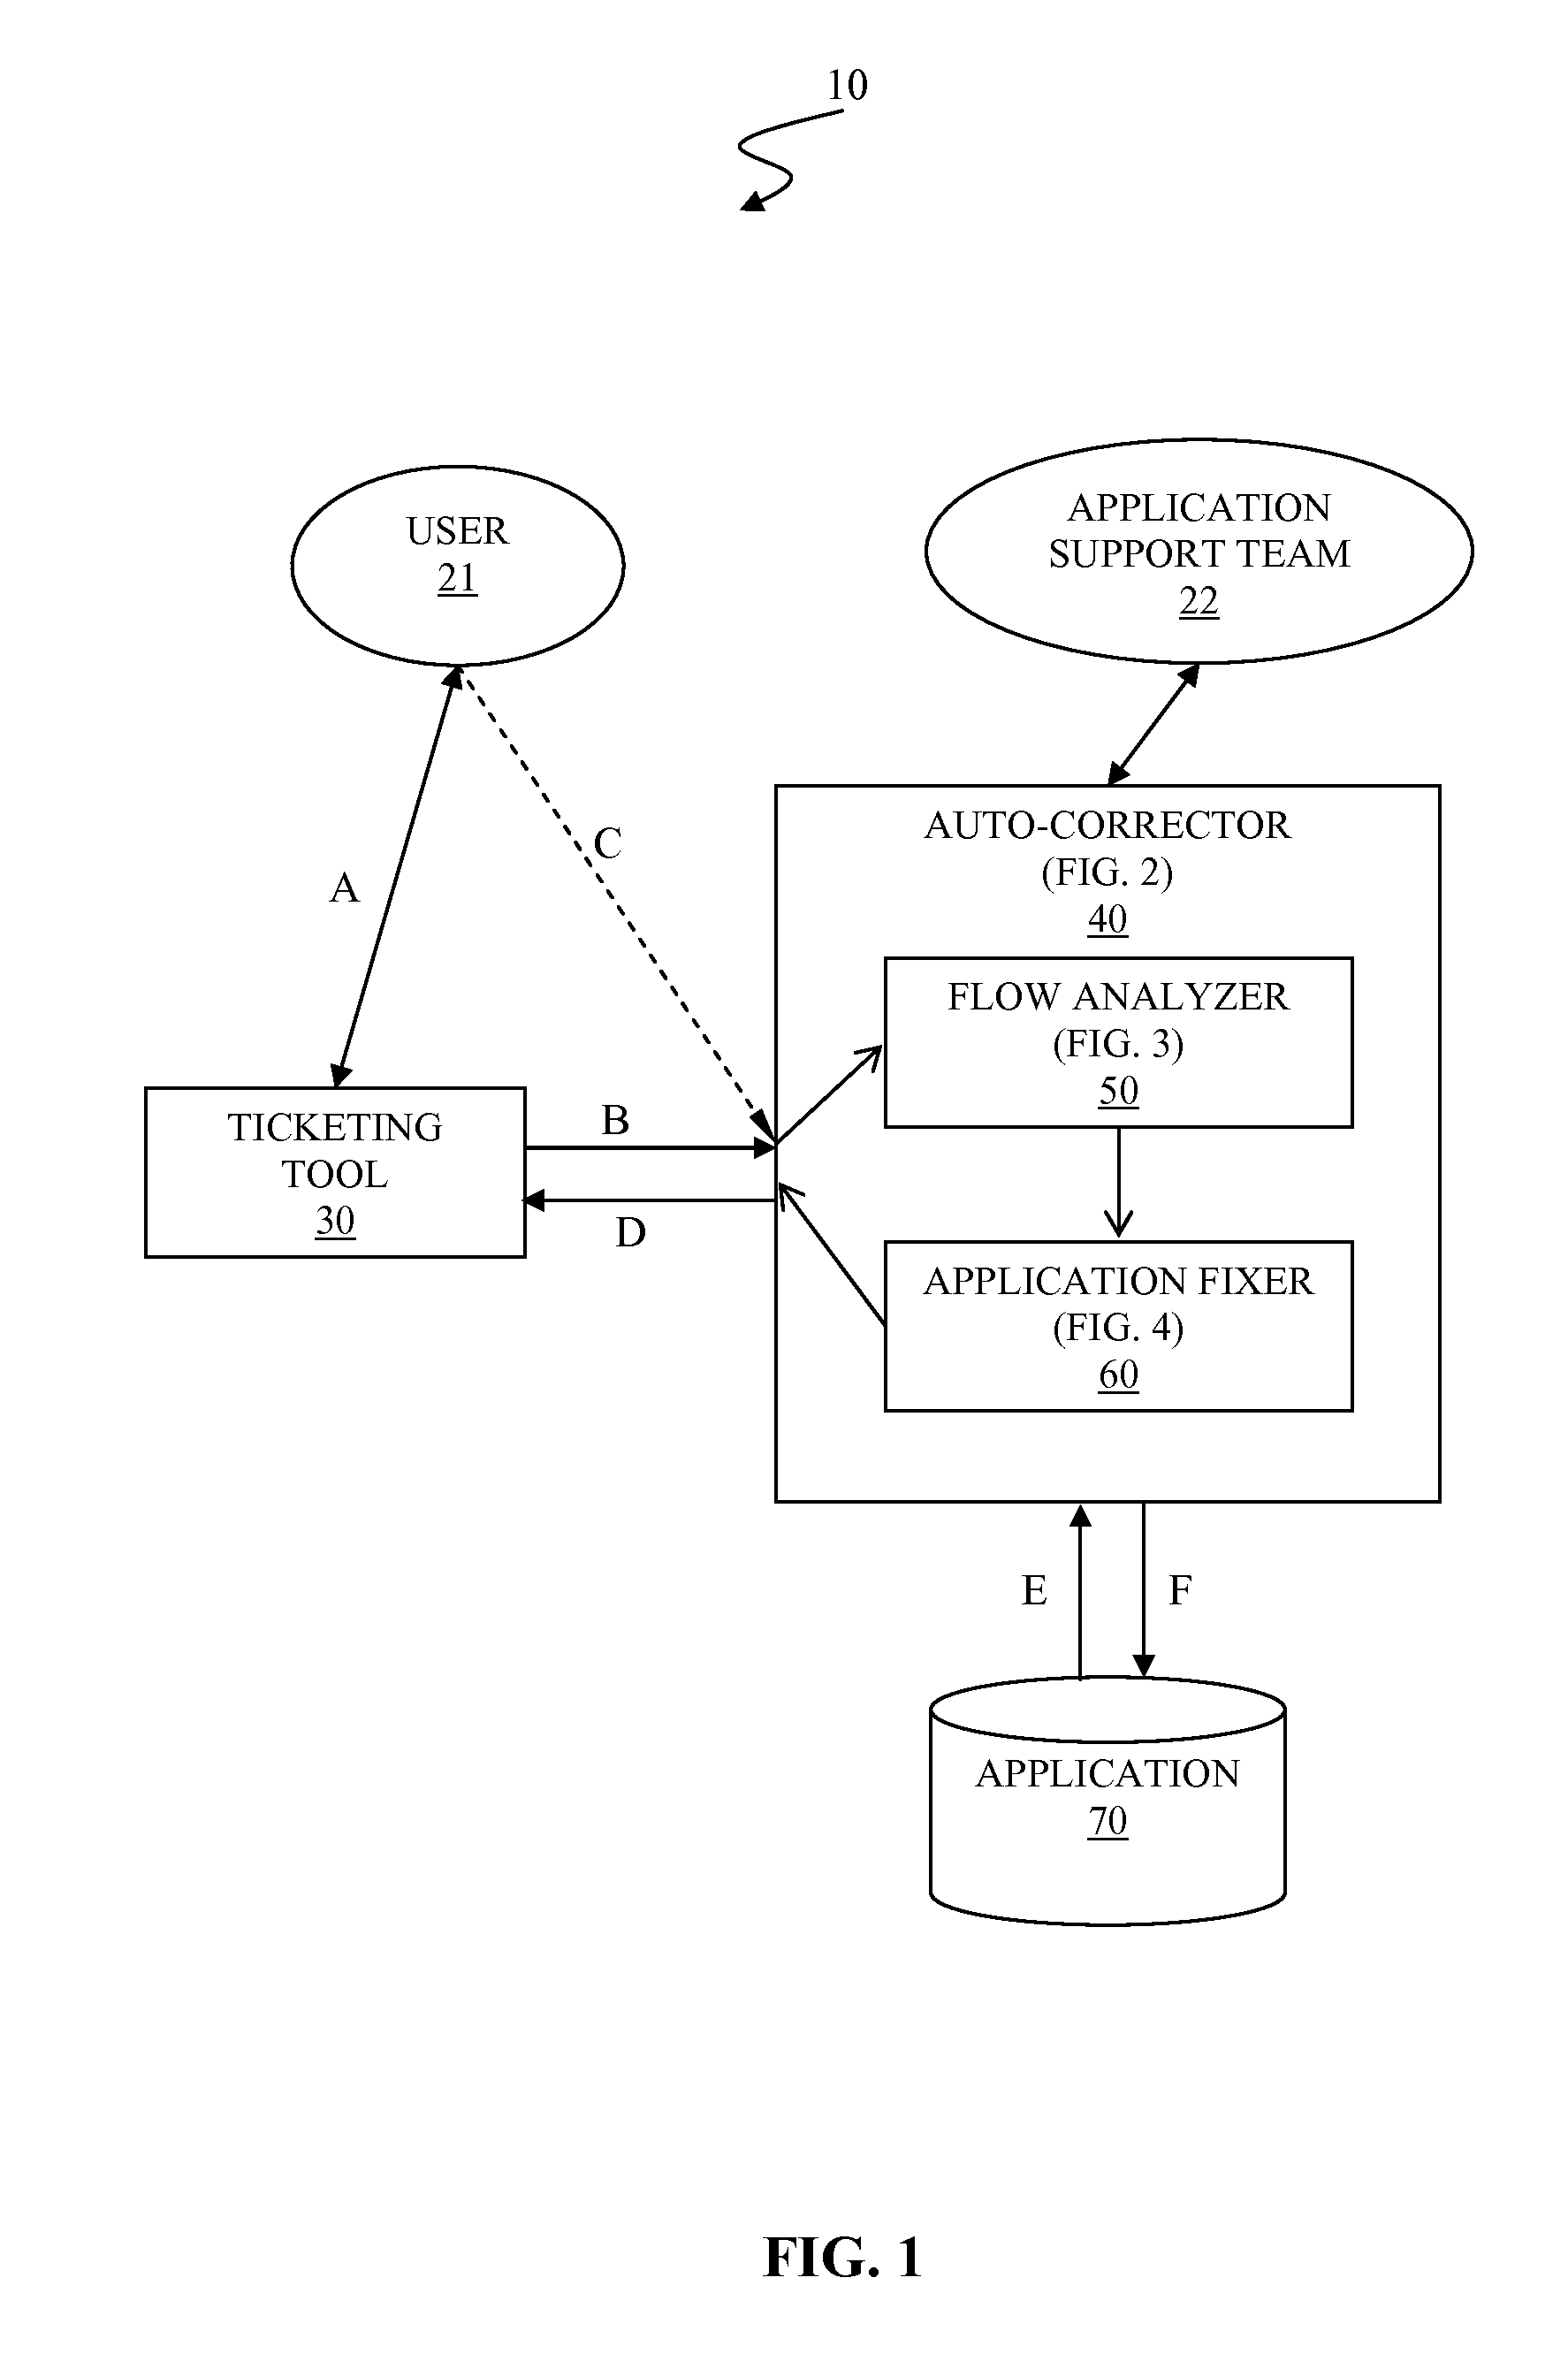 Automatic correction of application based on runtime behavior